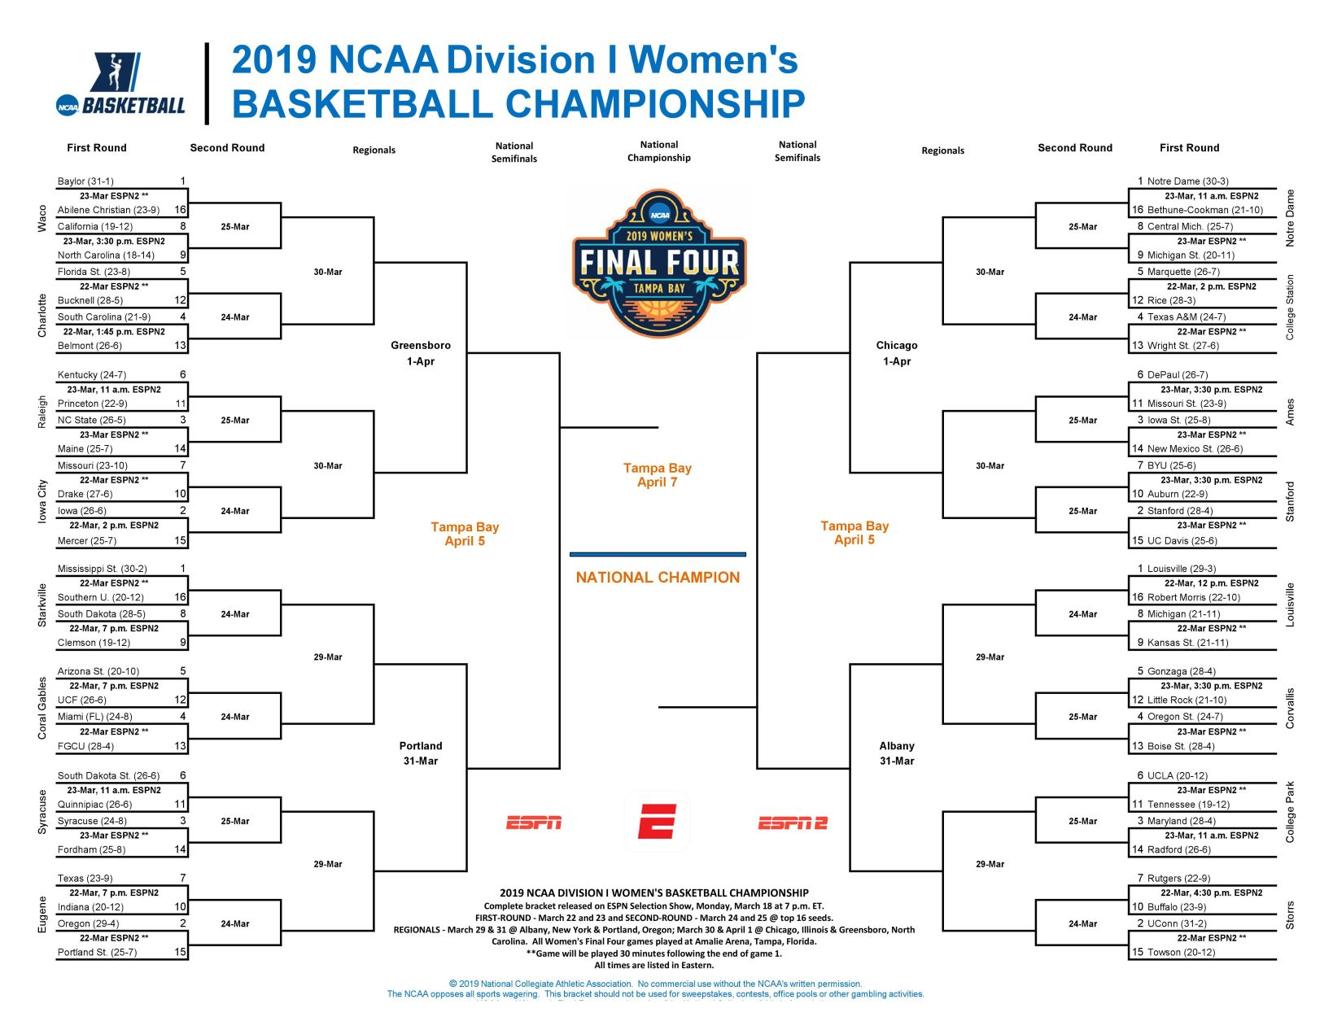 Women's basketball bracket released Monday, fill out your bracket here